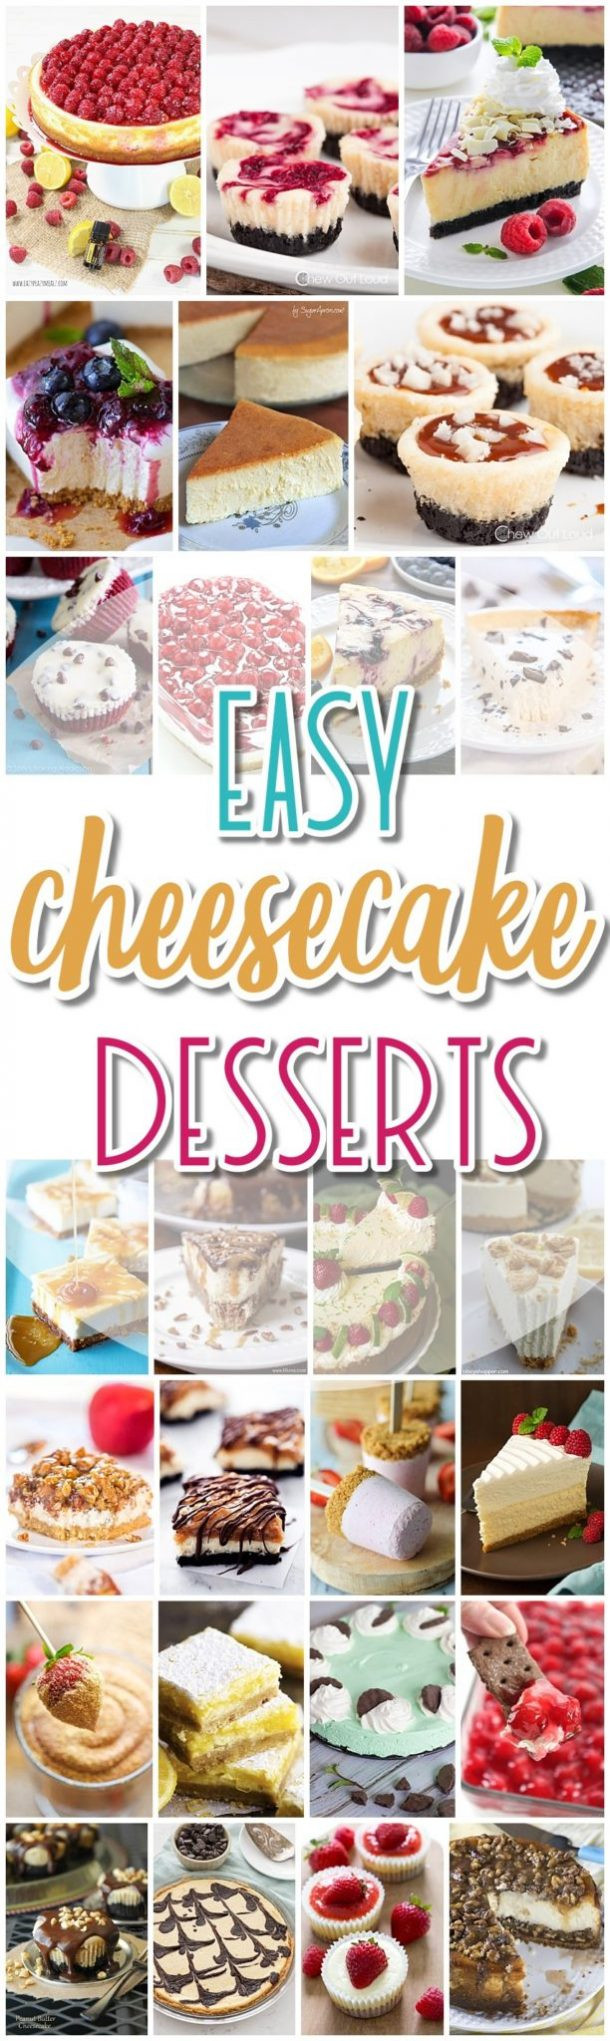 Easy Party Desserts
 The BEST Cheesecake Recipes – Favorite Easy Party Desserts